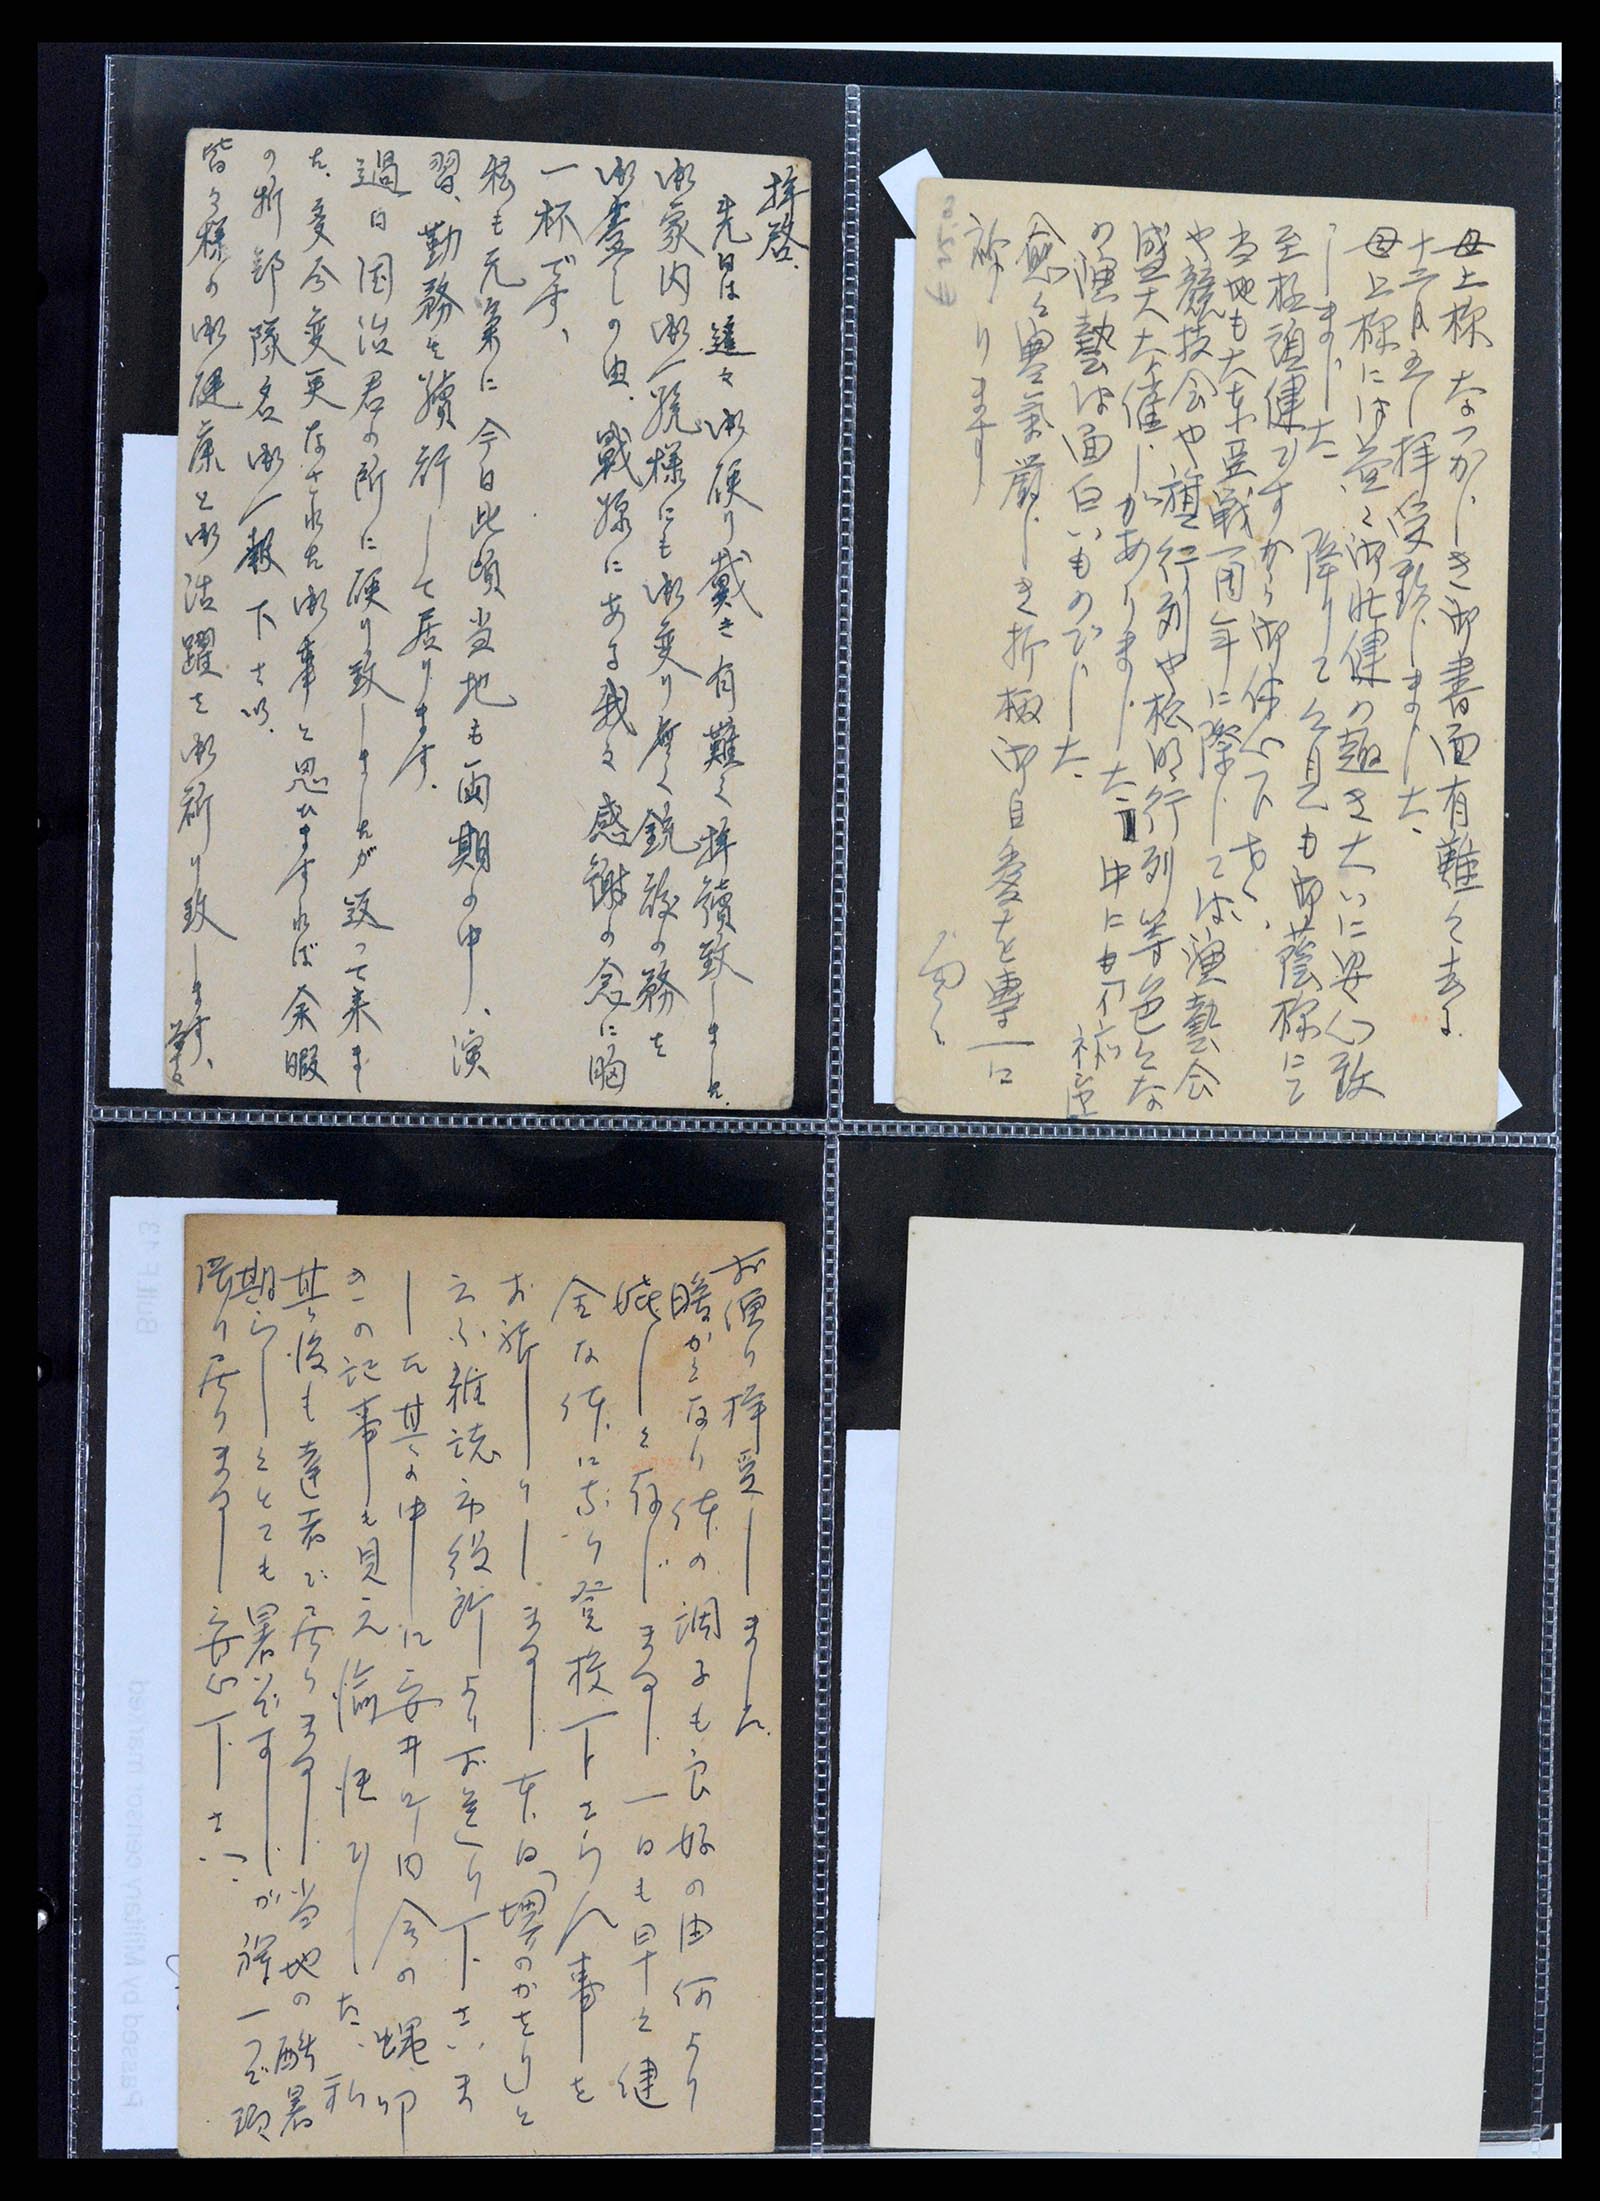 37423 019 - Stamp collection 37423 Dutch Indies Japanese occupation covers 1942-1945